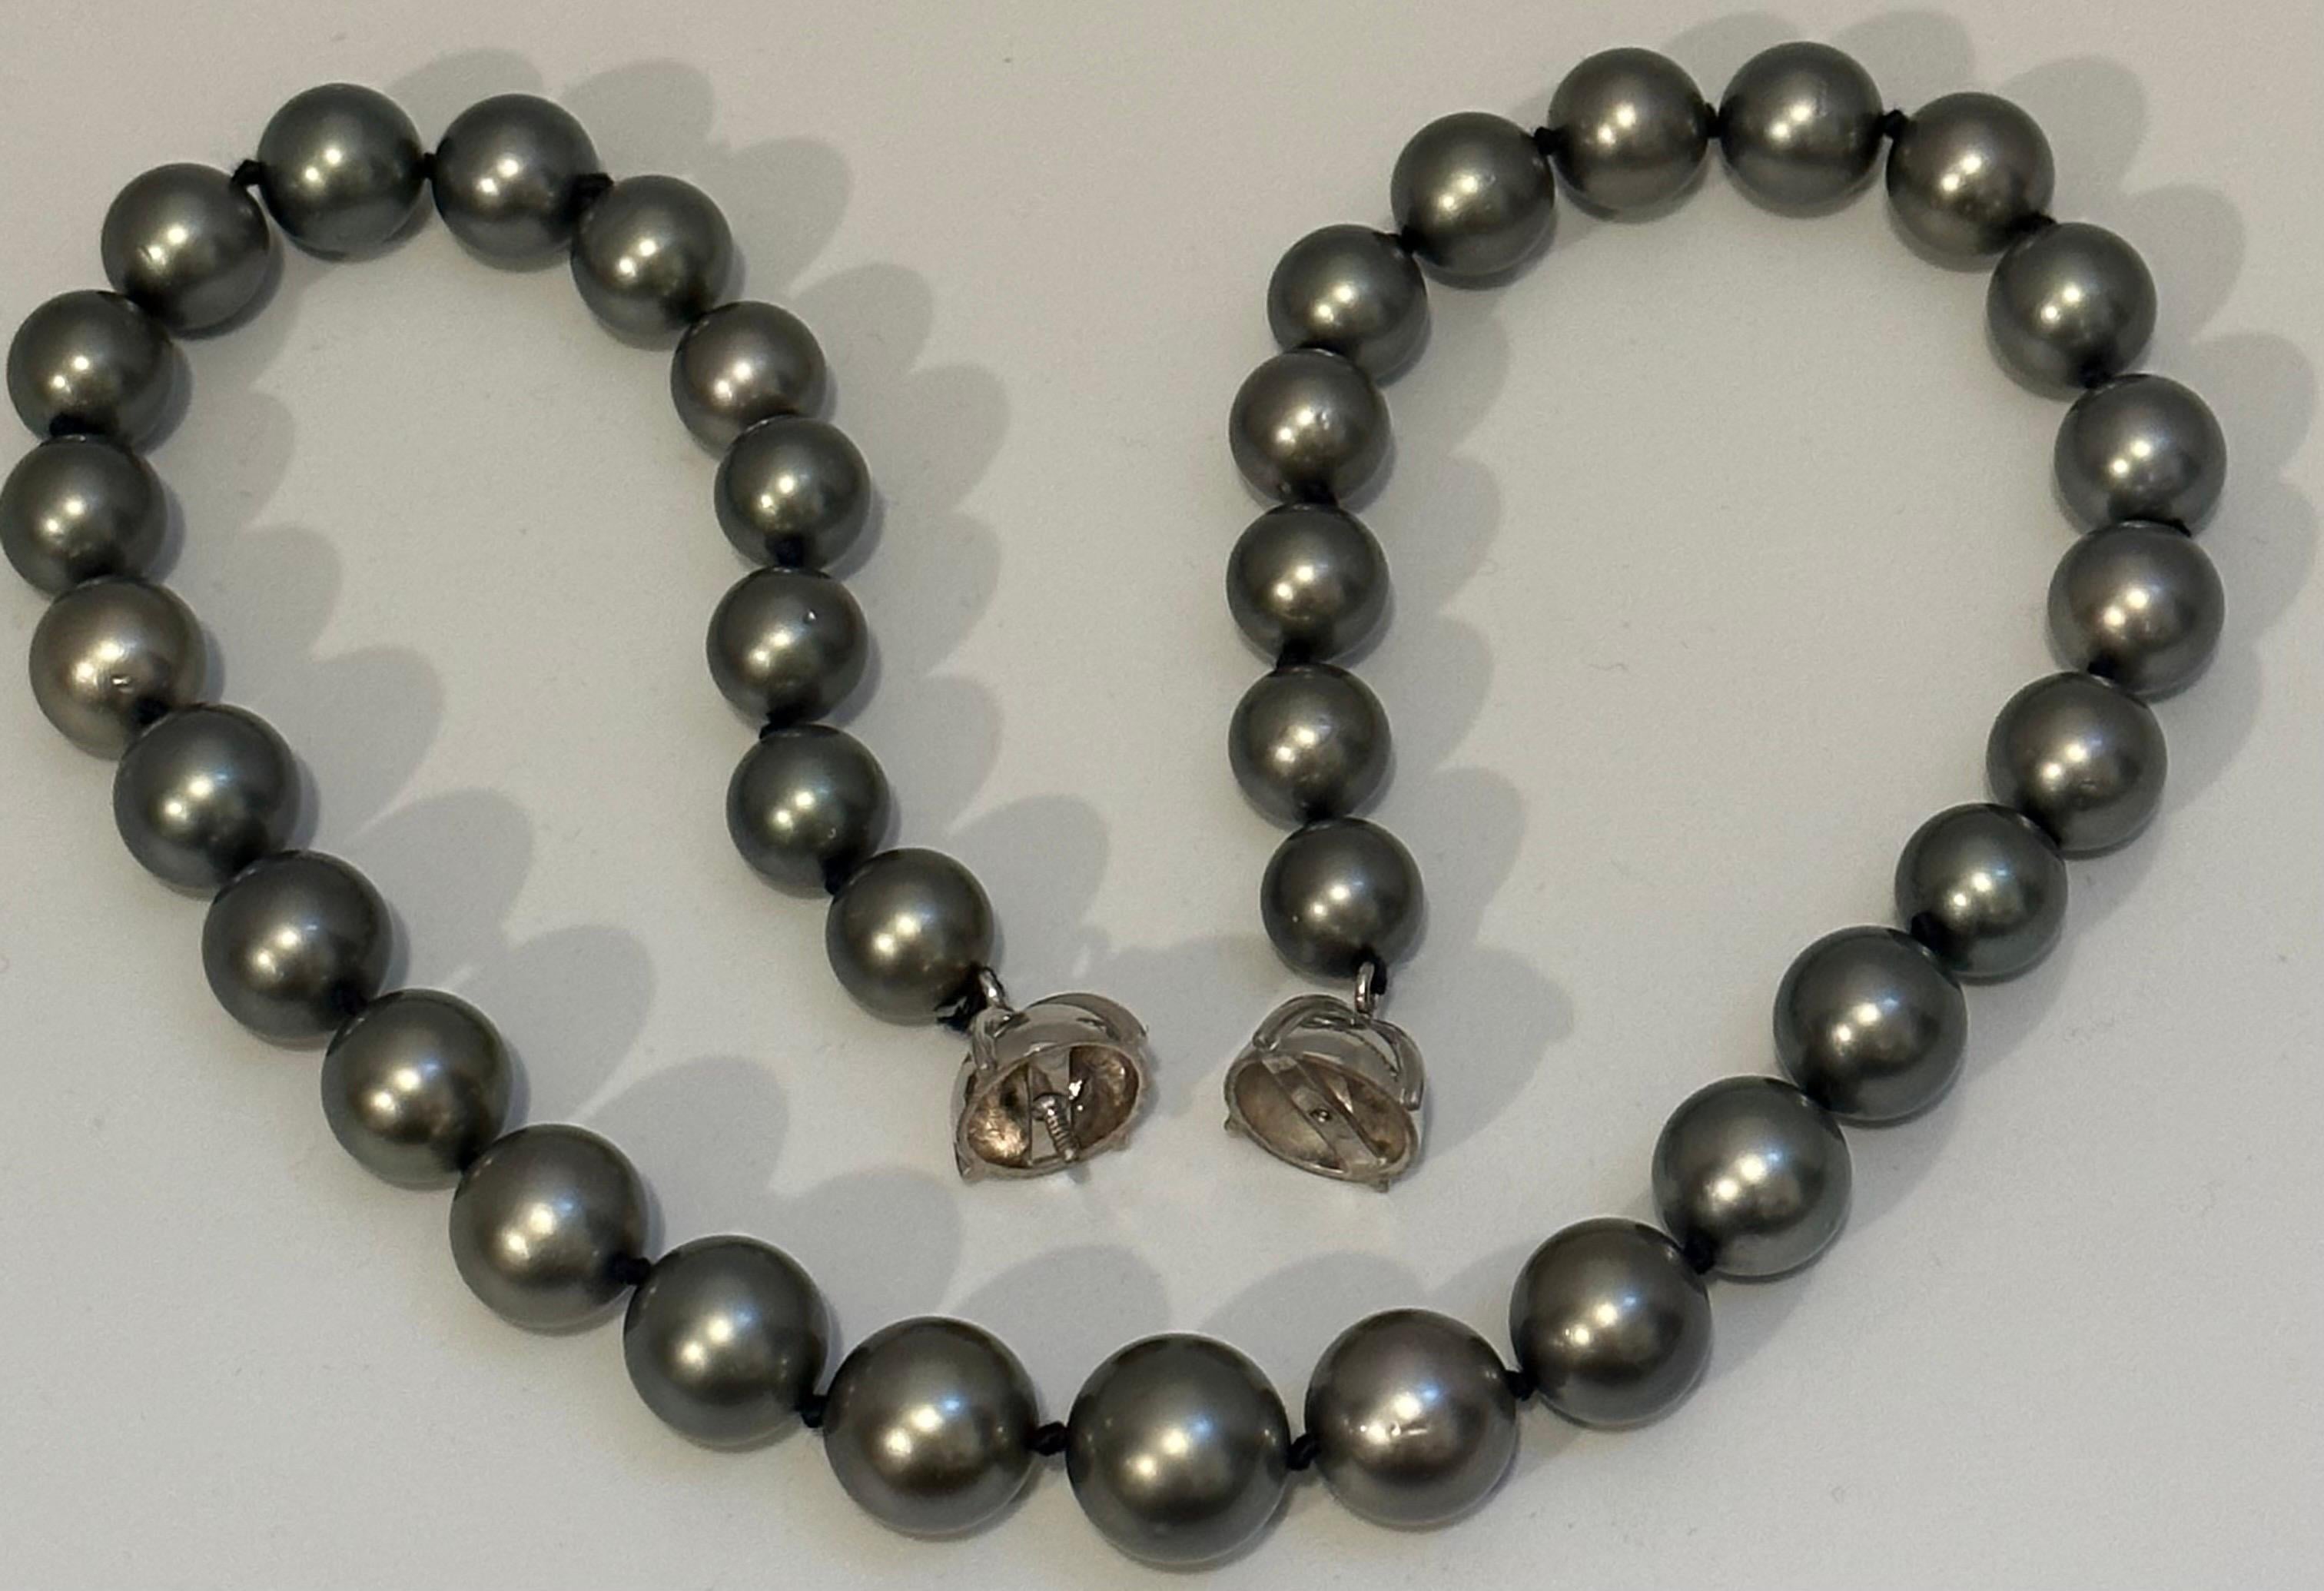 11-15 mm Tahitian Black Graduating Pearls Strand Necklace, Estate, WG For Sale 1